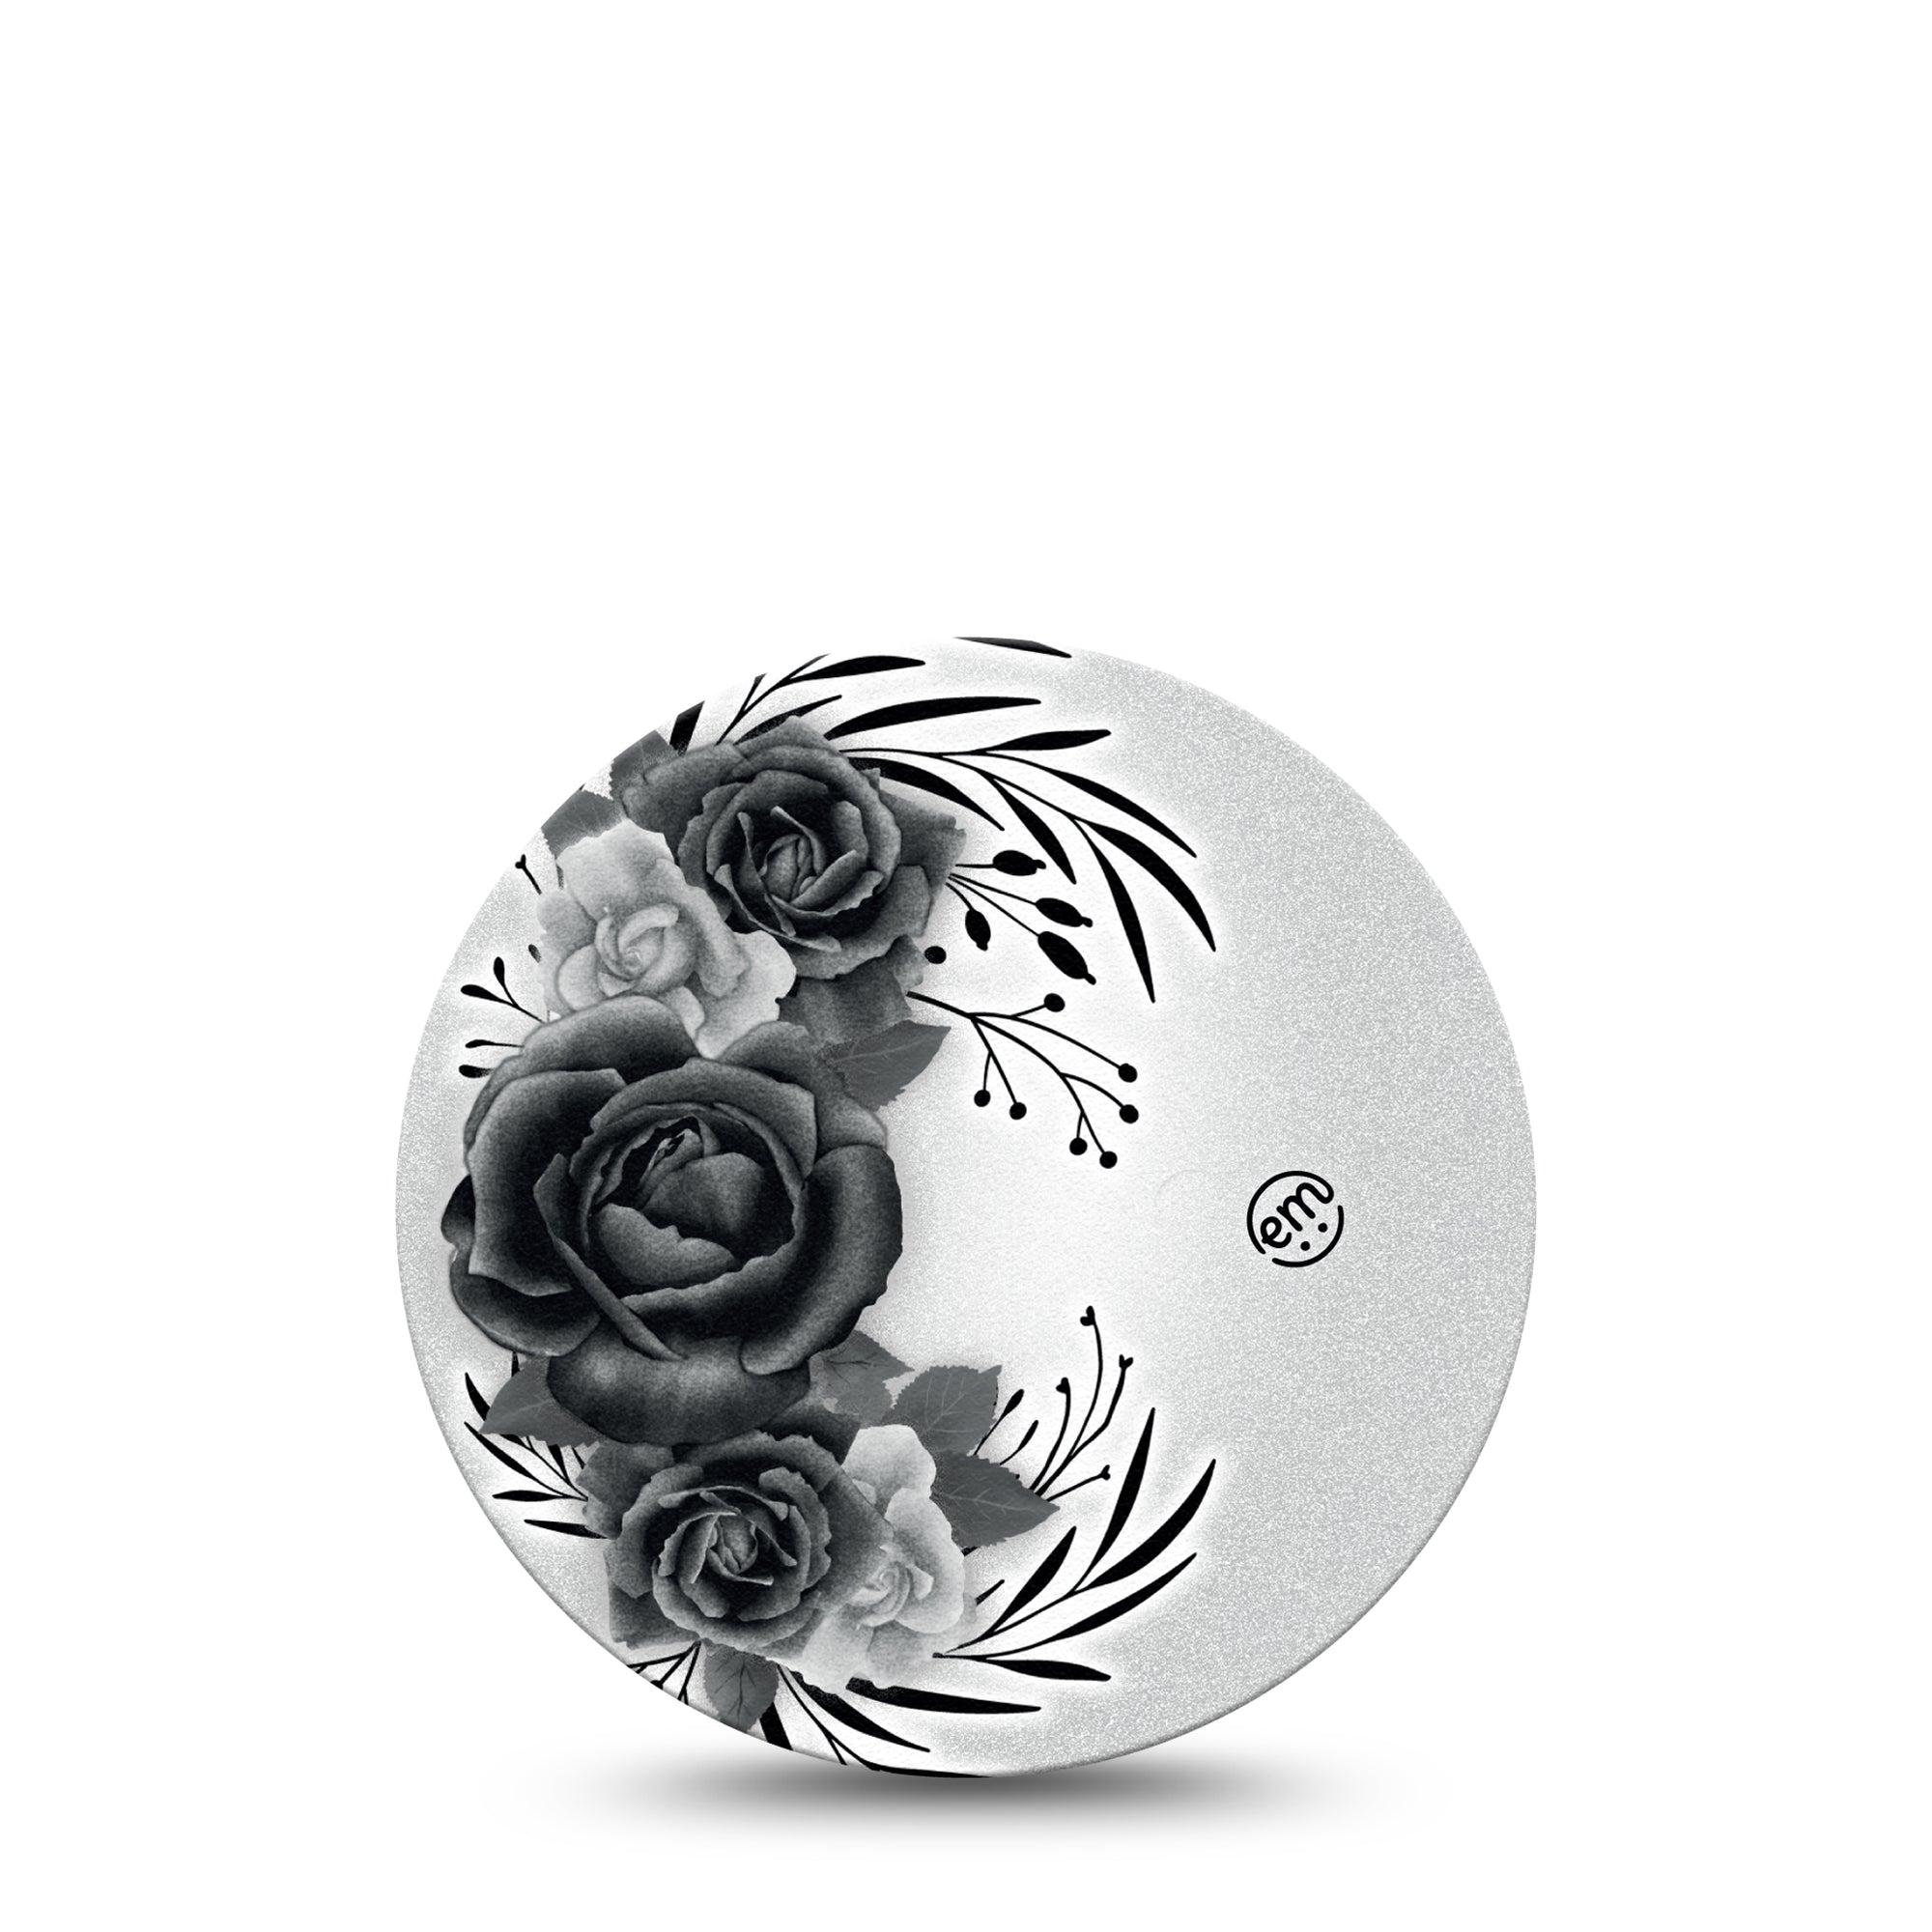 ExpressionMed Tattoo Rose Libre 2 Overpatch, Single, Tattoo Artwork Inspired, CGM Adhesive Tape Design